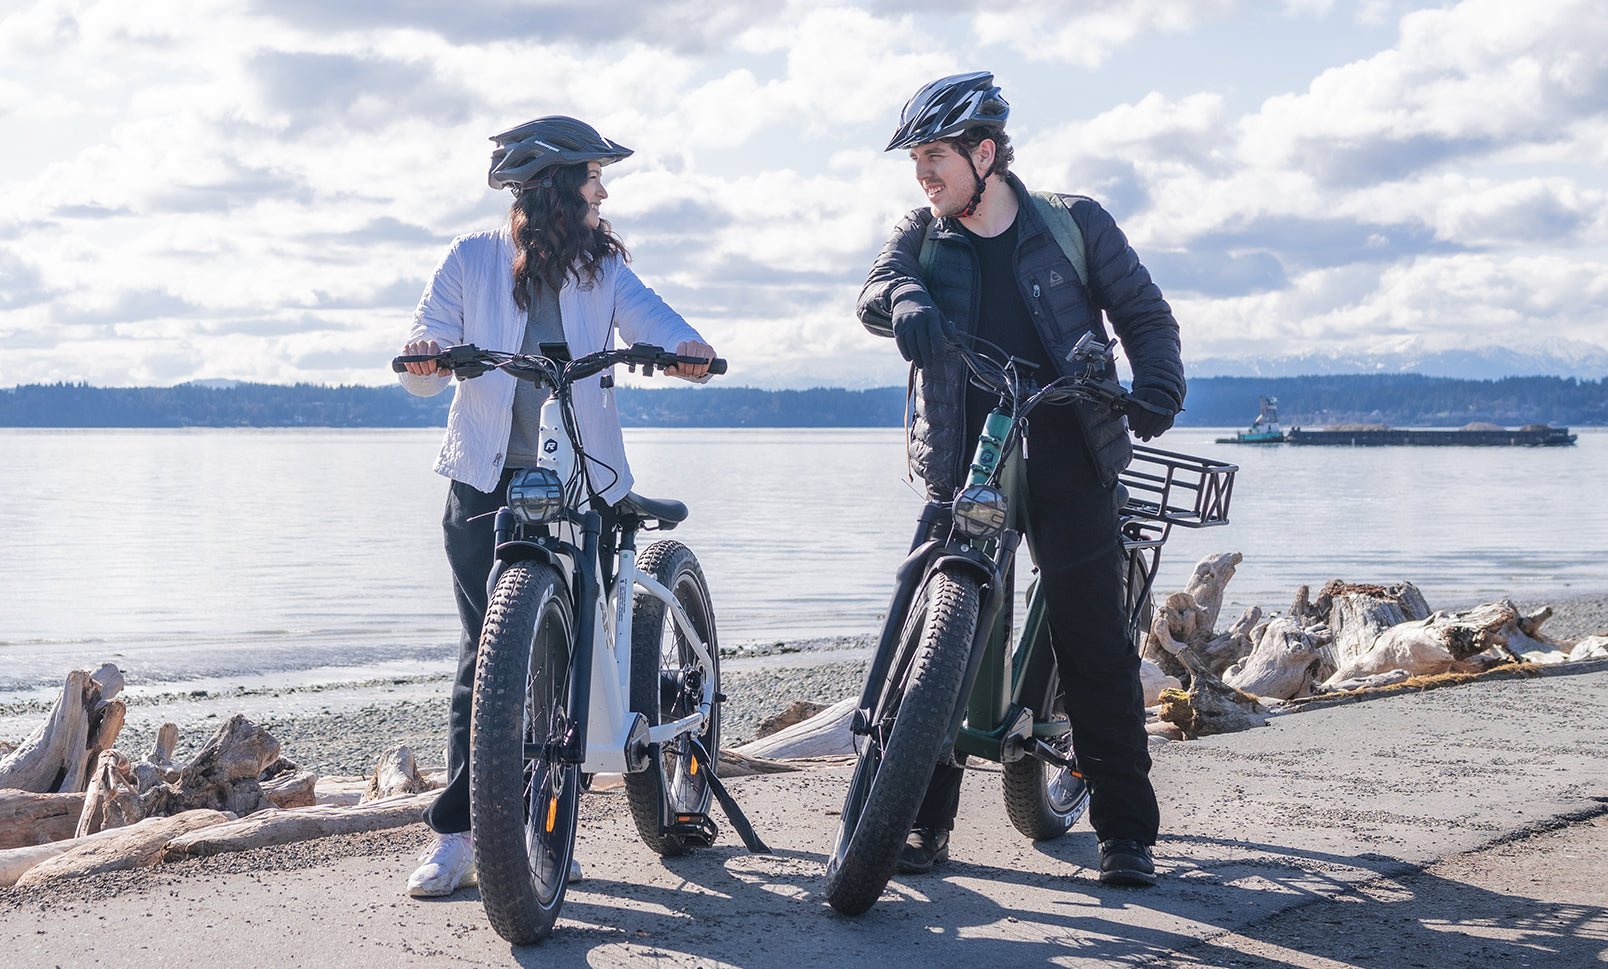 The Perfect Valentine's Day Gift - An eBike Adventure